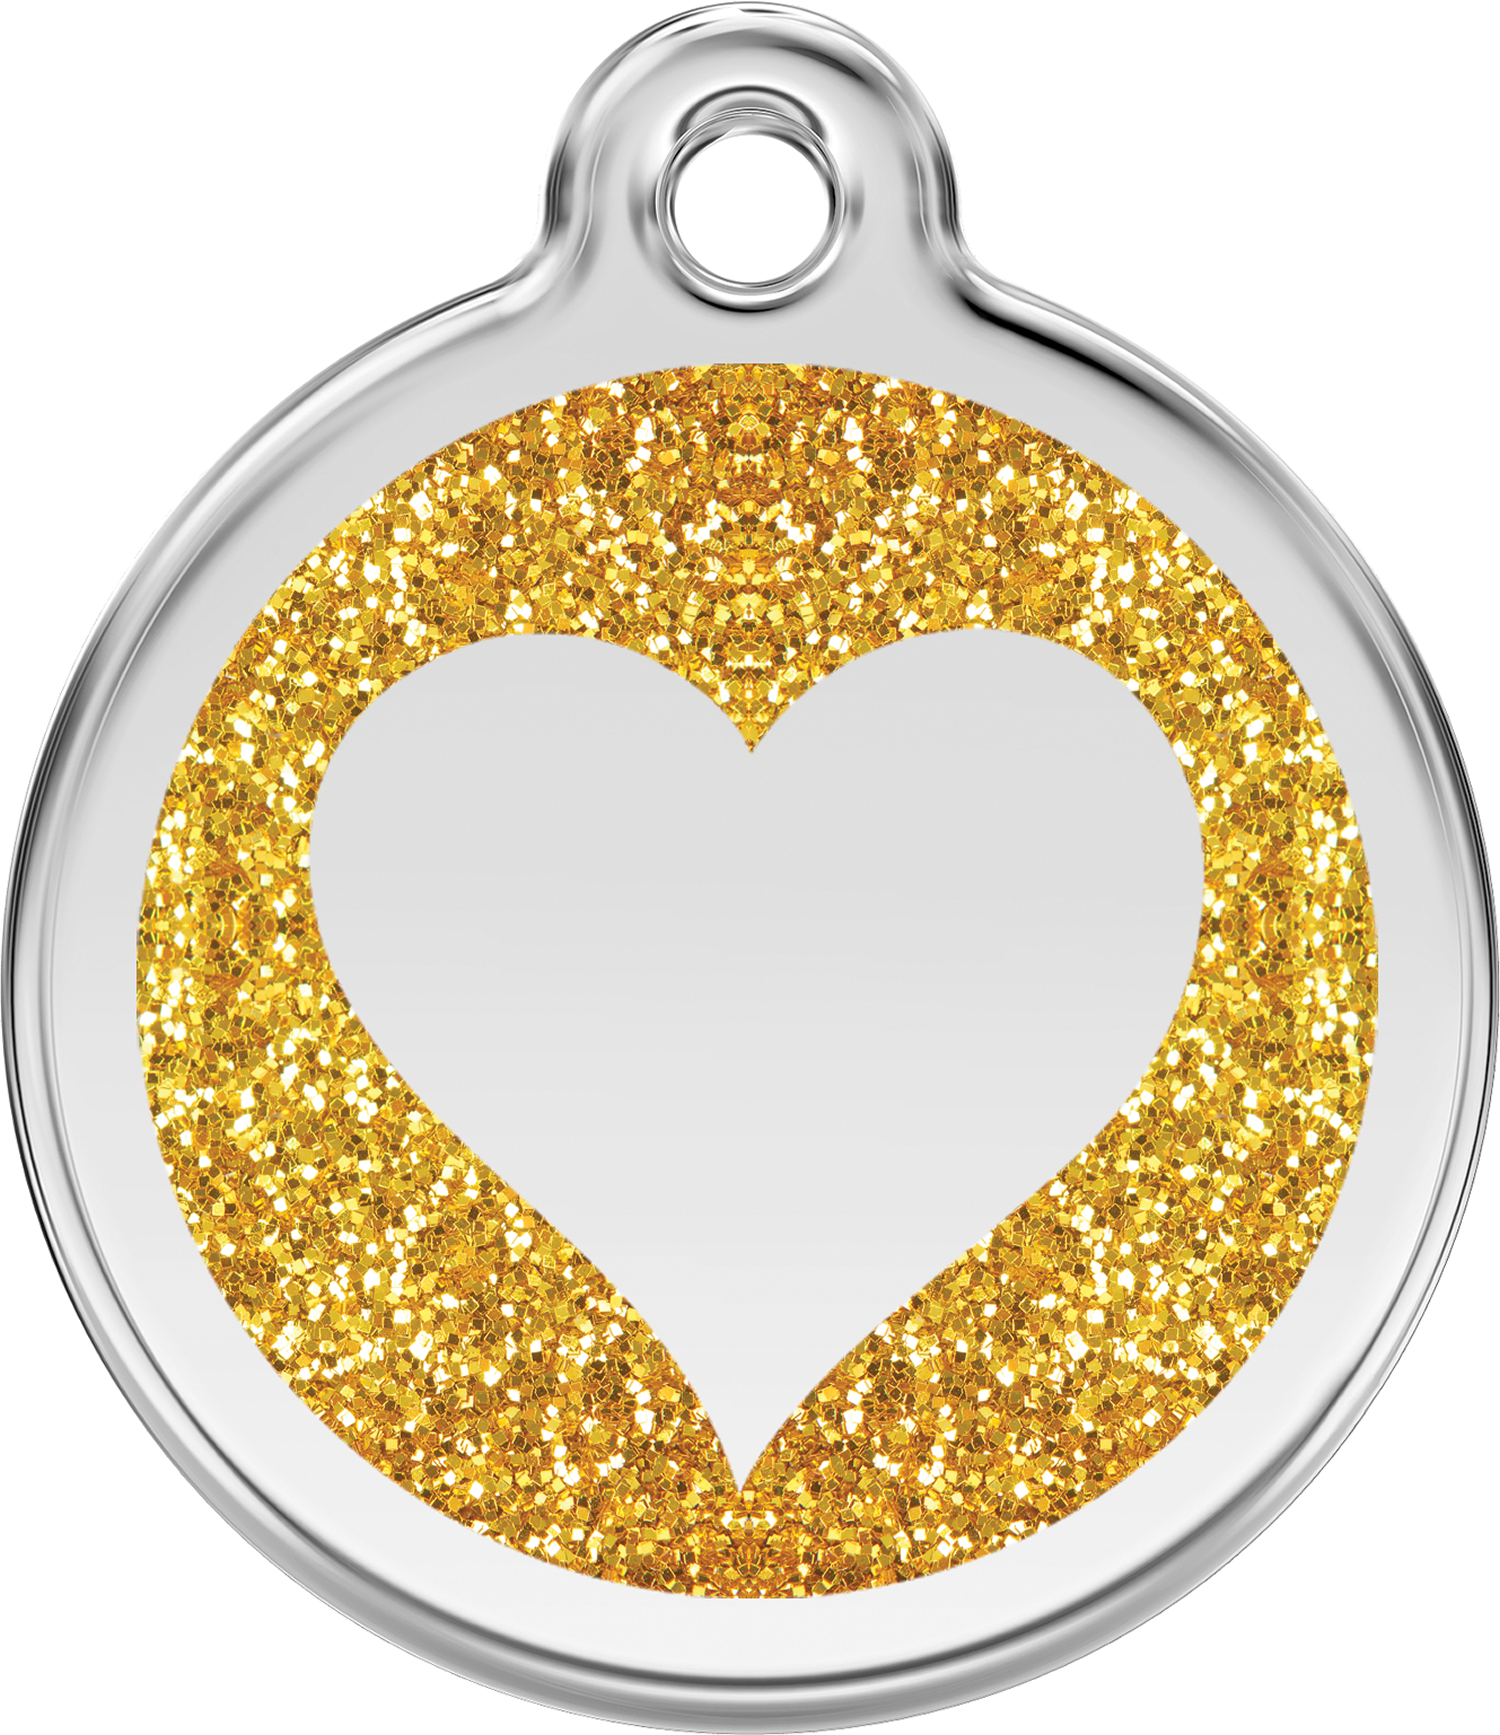 Red Dingo Heart Glitter Dog Tag